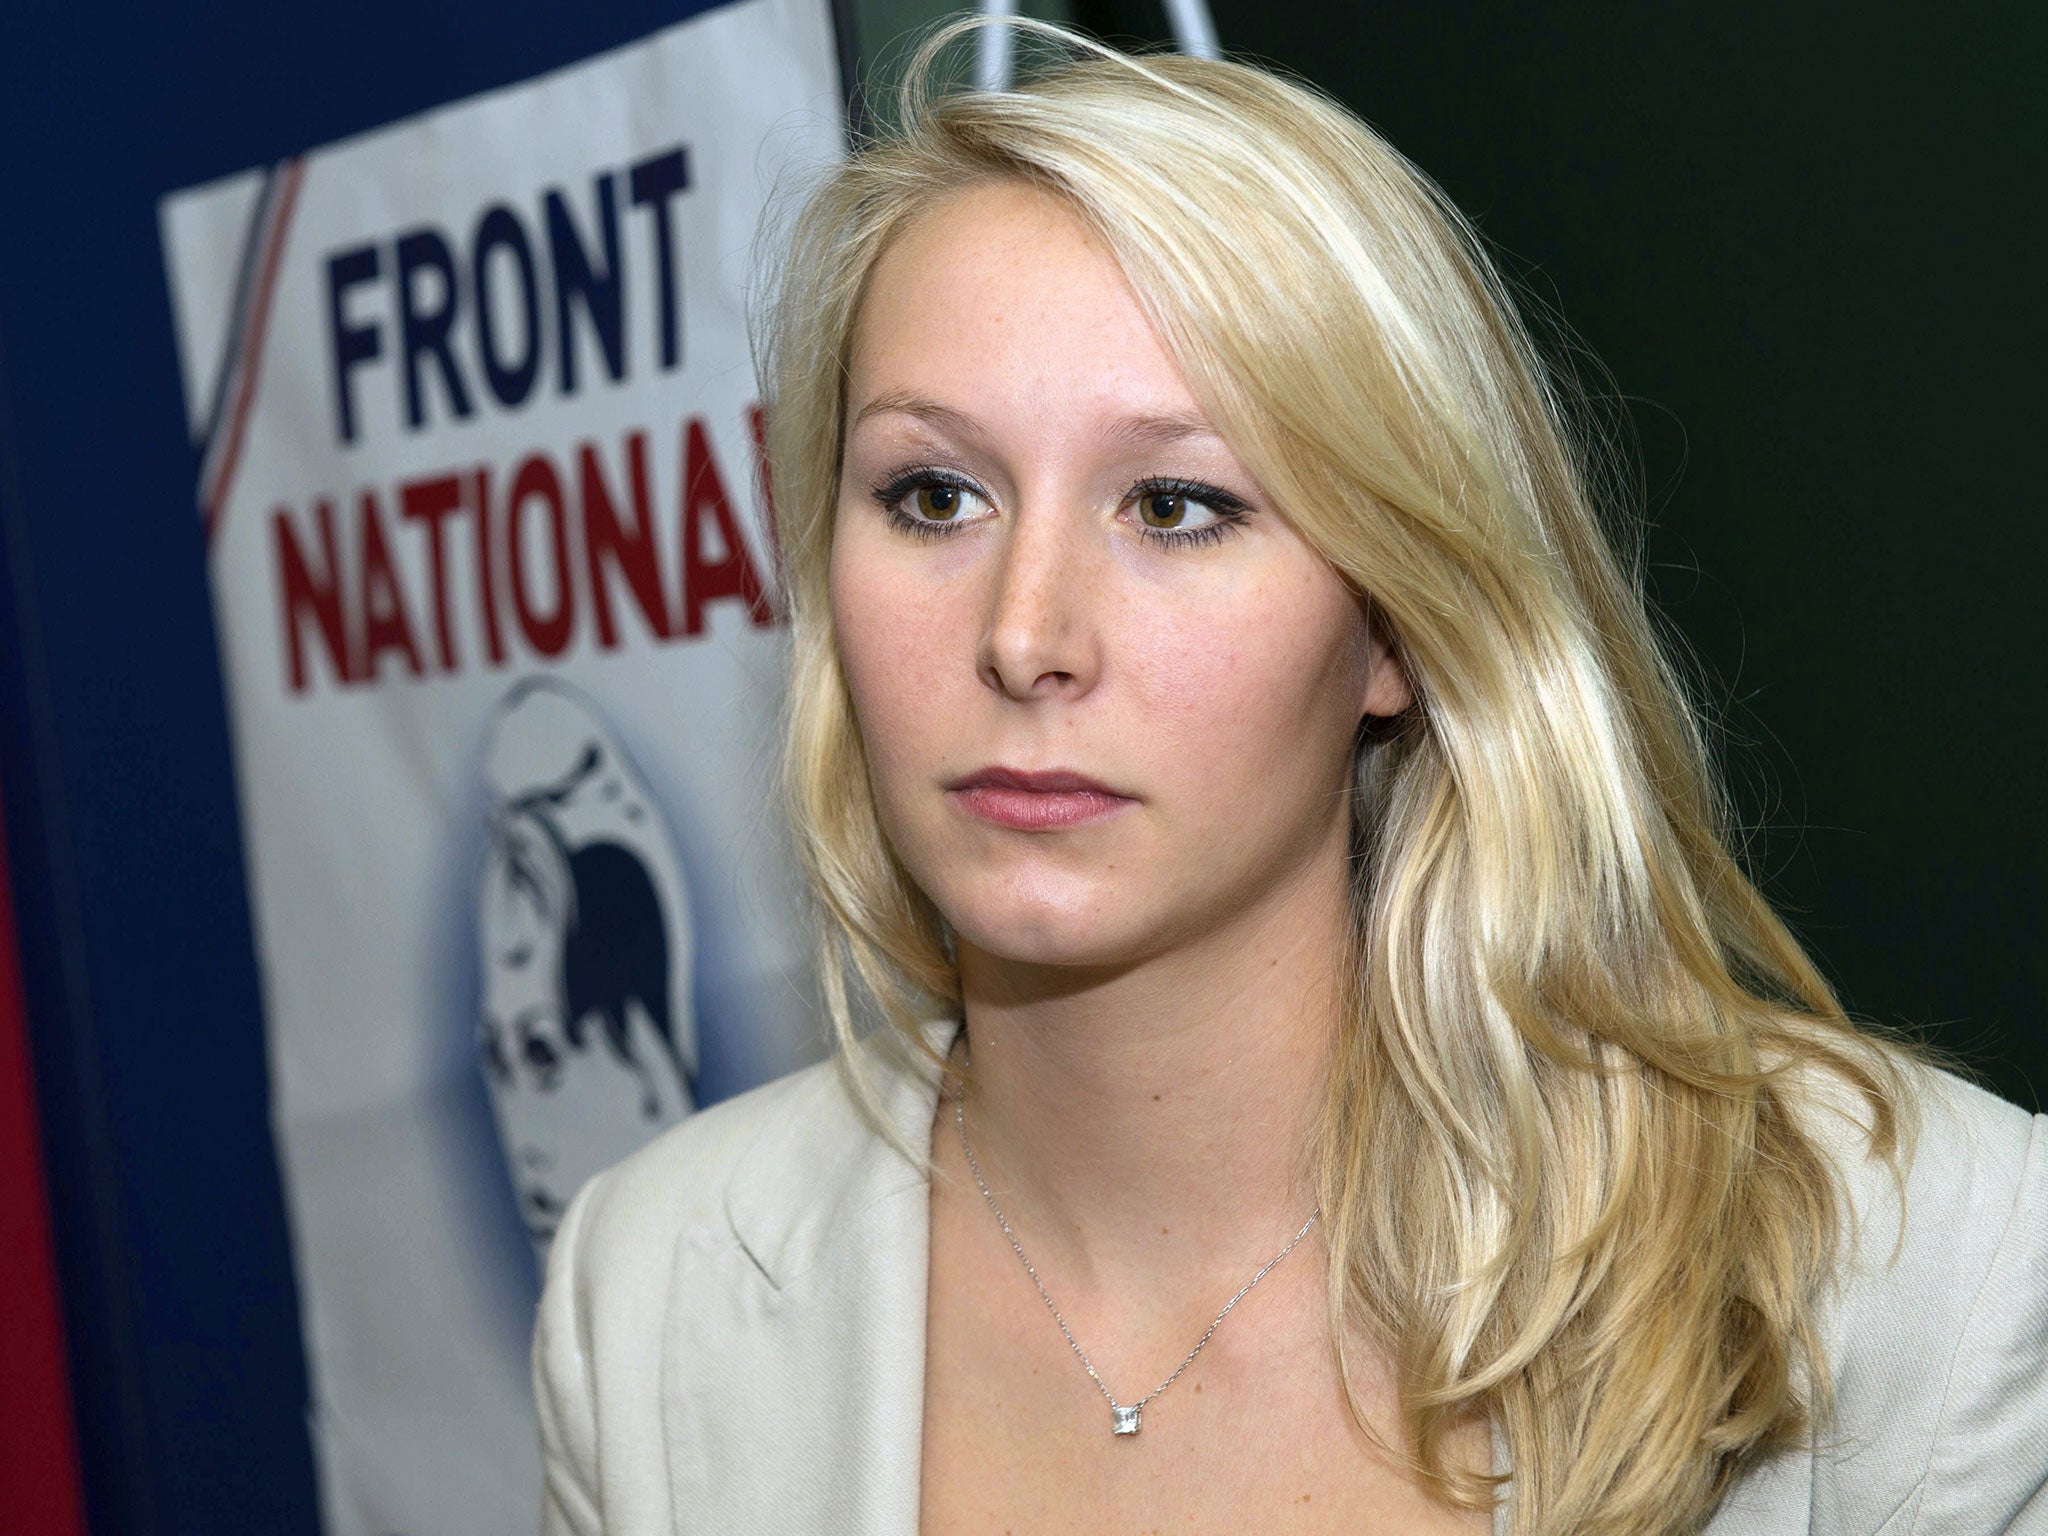 According to opinion polls, Marion Maréchal-Le Pen is expected to win a seat in the southern region of Provence-Alpes-Côte d'Azur as France's regional elections are taking place